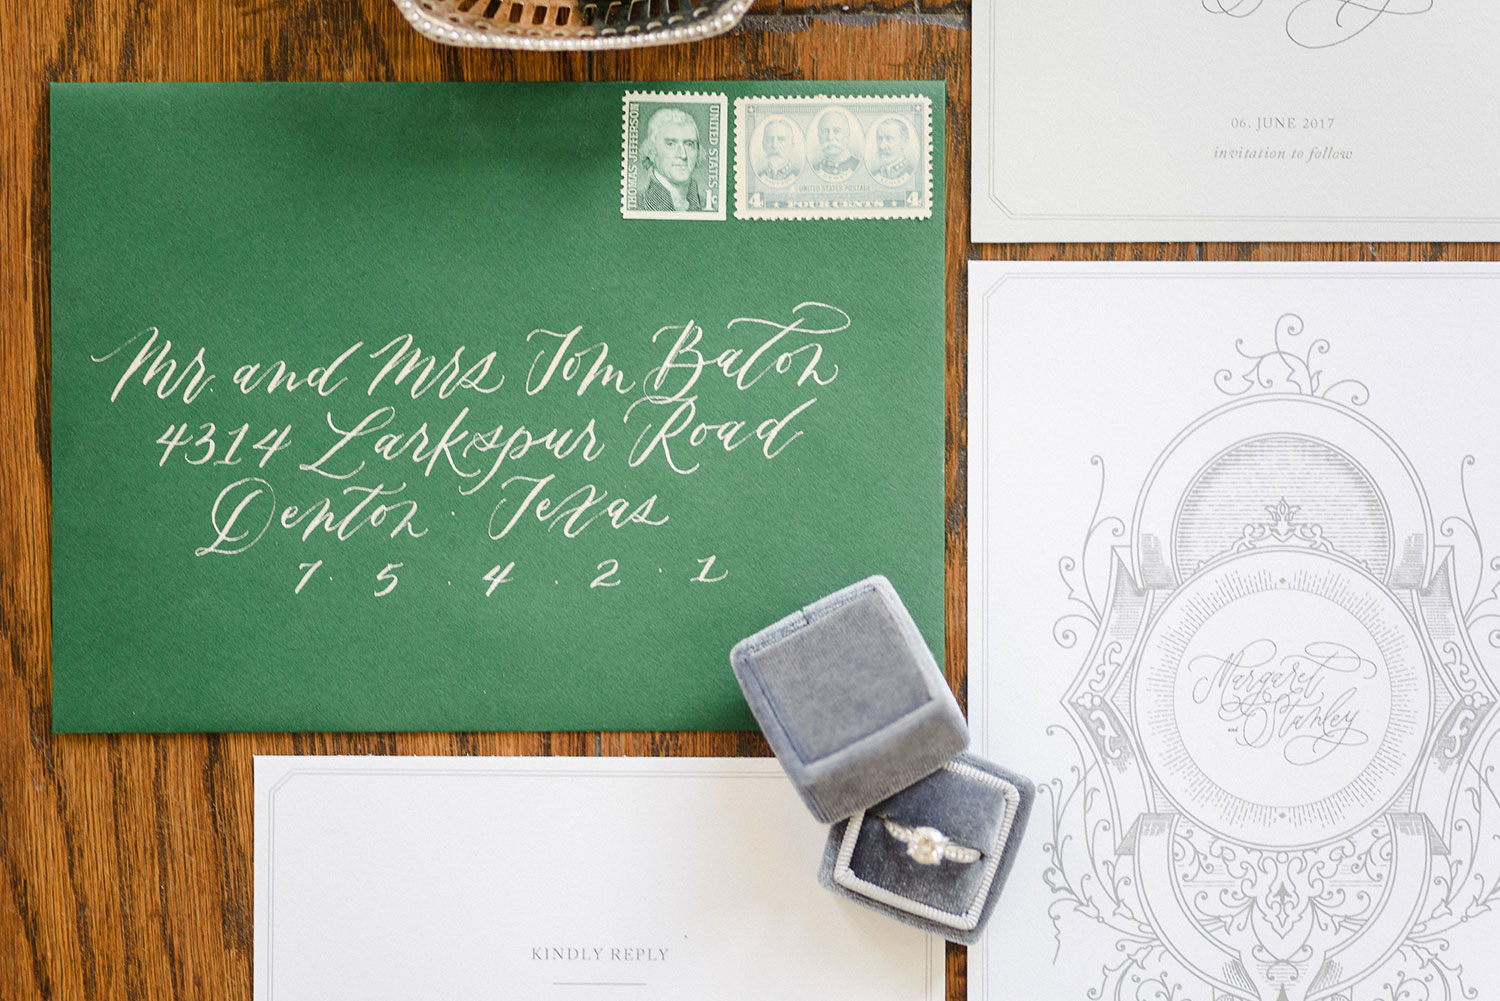 Green envelope wedding invitation with white calligraphy and a light grey velvet ring box